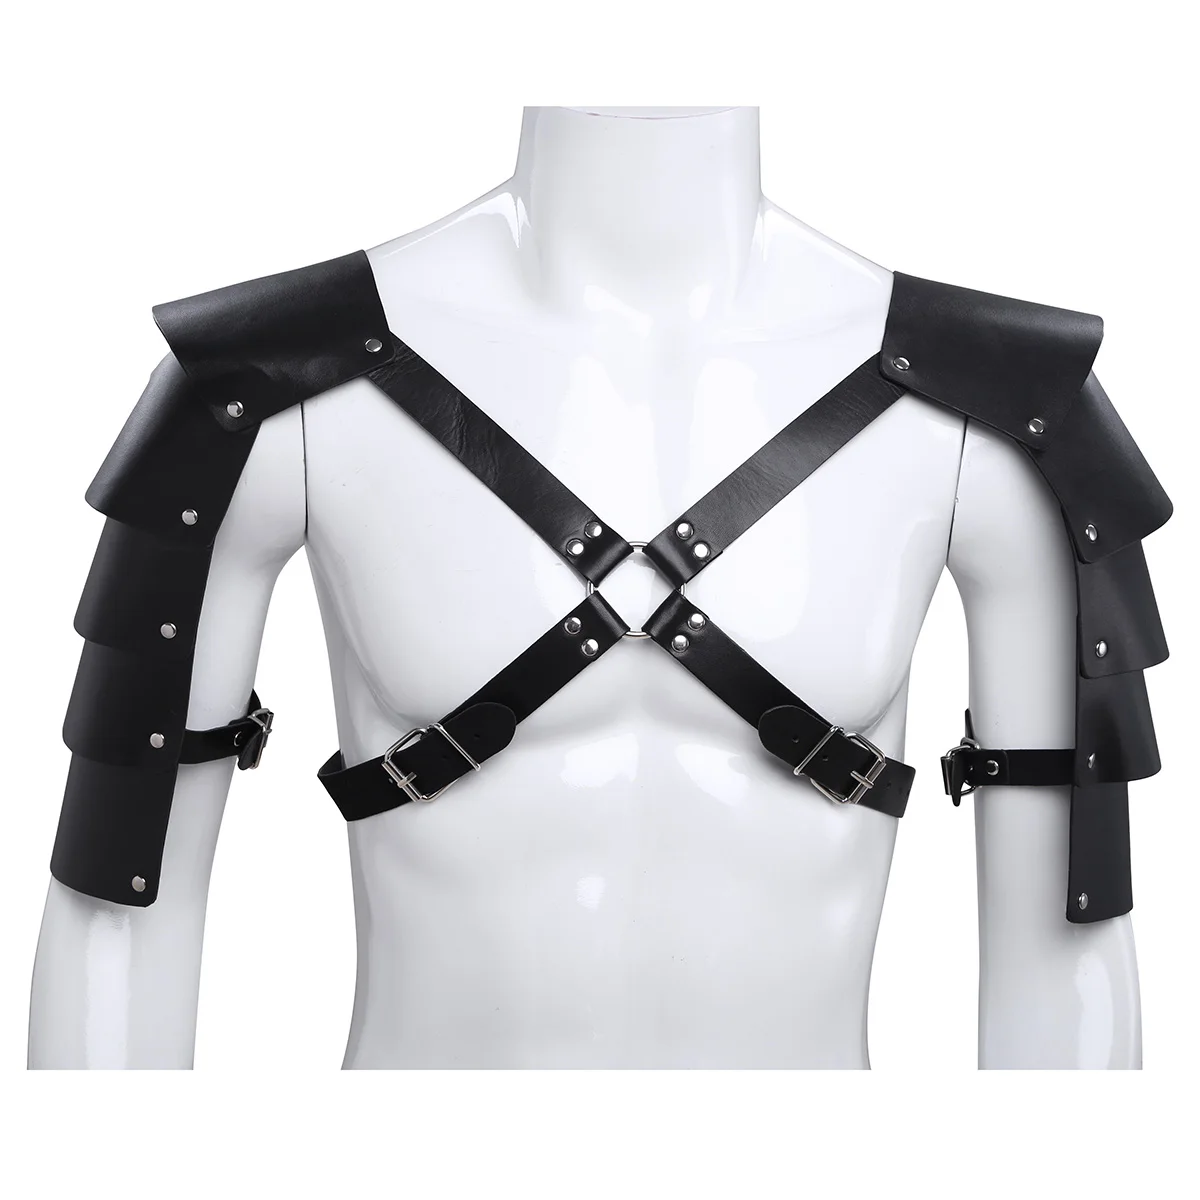 Harness Brave, Men's Harness, Leather harness, Fashion Harness